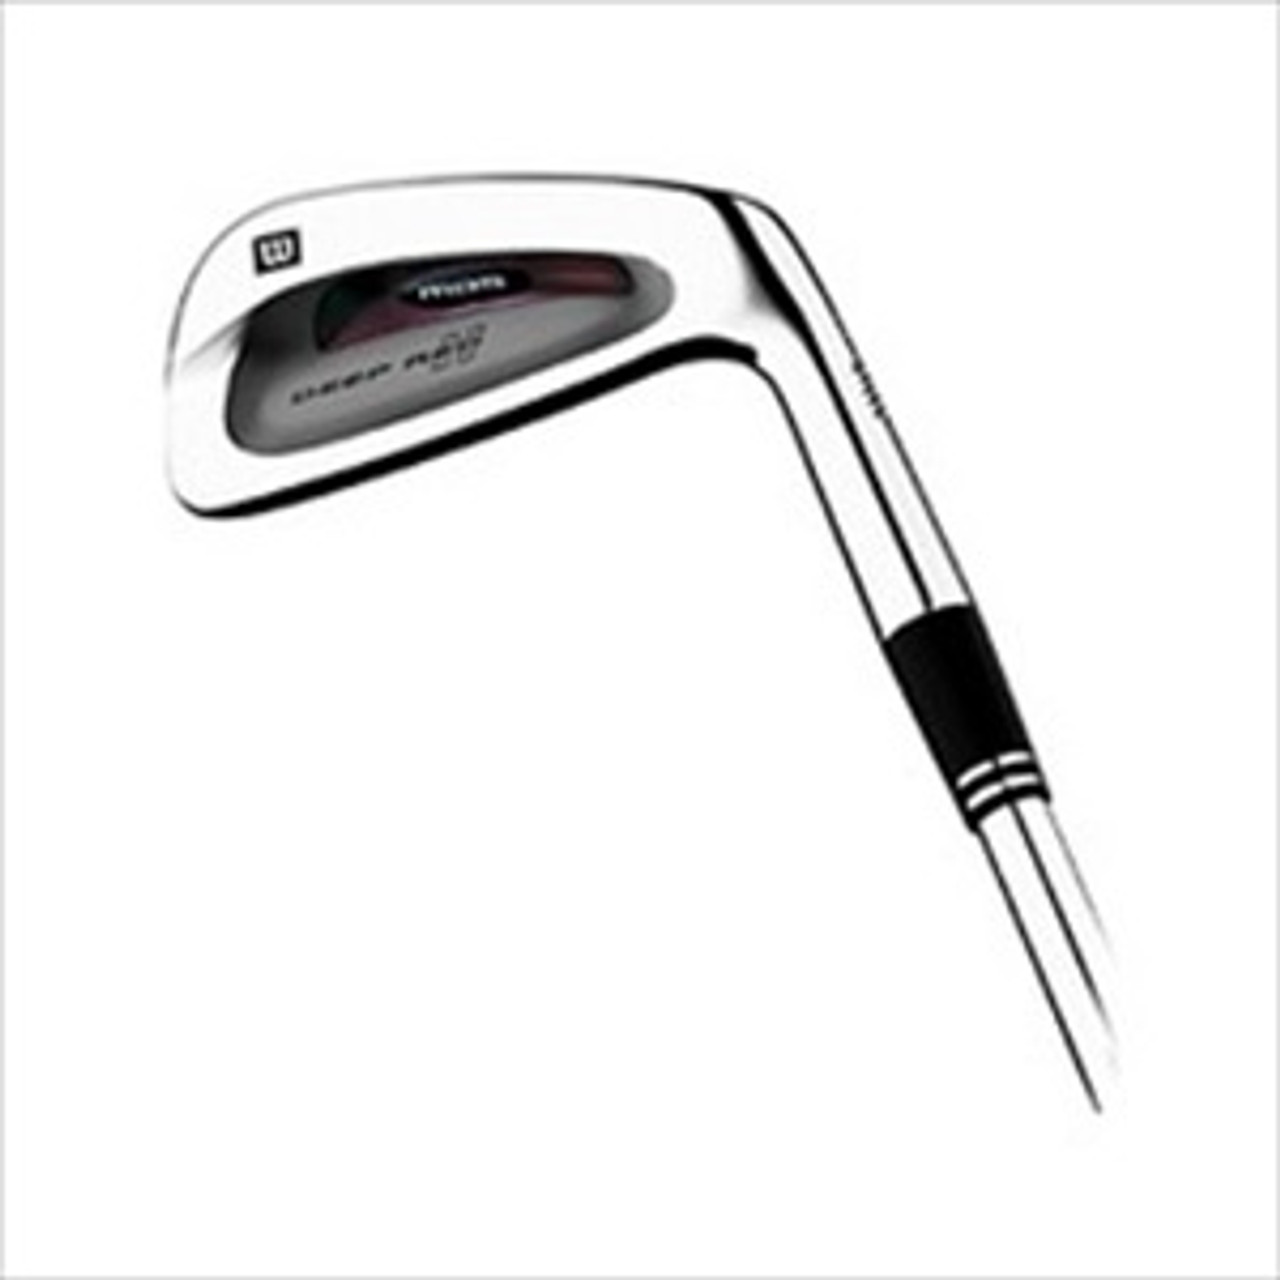 Wilson Deep Red Ii Pitching Wedge Pw Stiff Dynamic Gold Steel 0981878 Wr - Mikes Golf Outlet